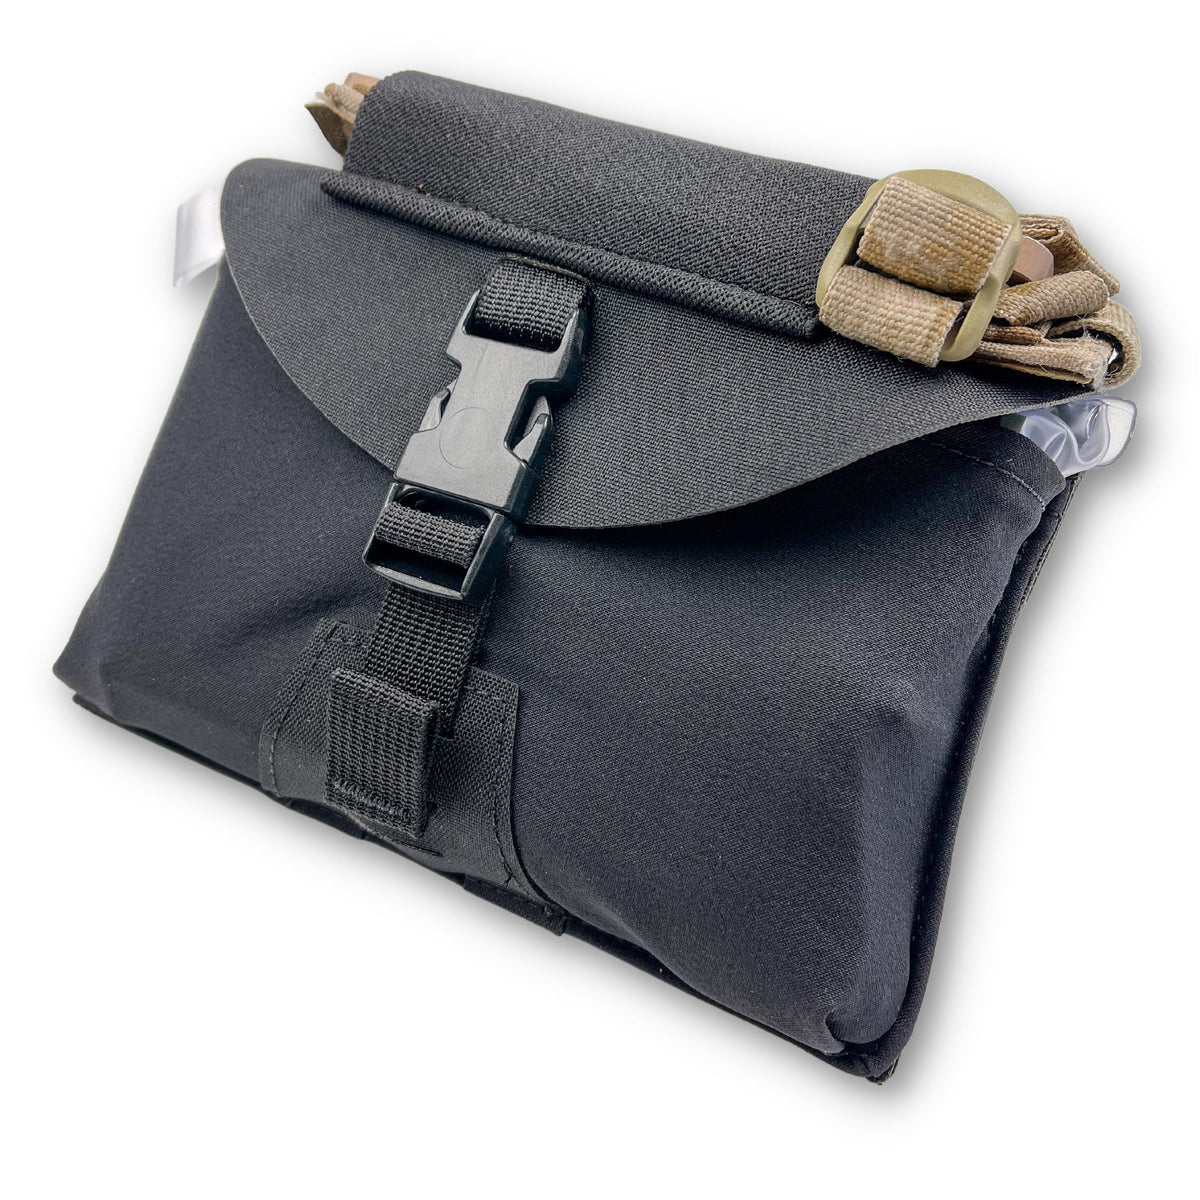 GBRS Group IFAS Individual First Aid System Pouch - Phokus Research Group